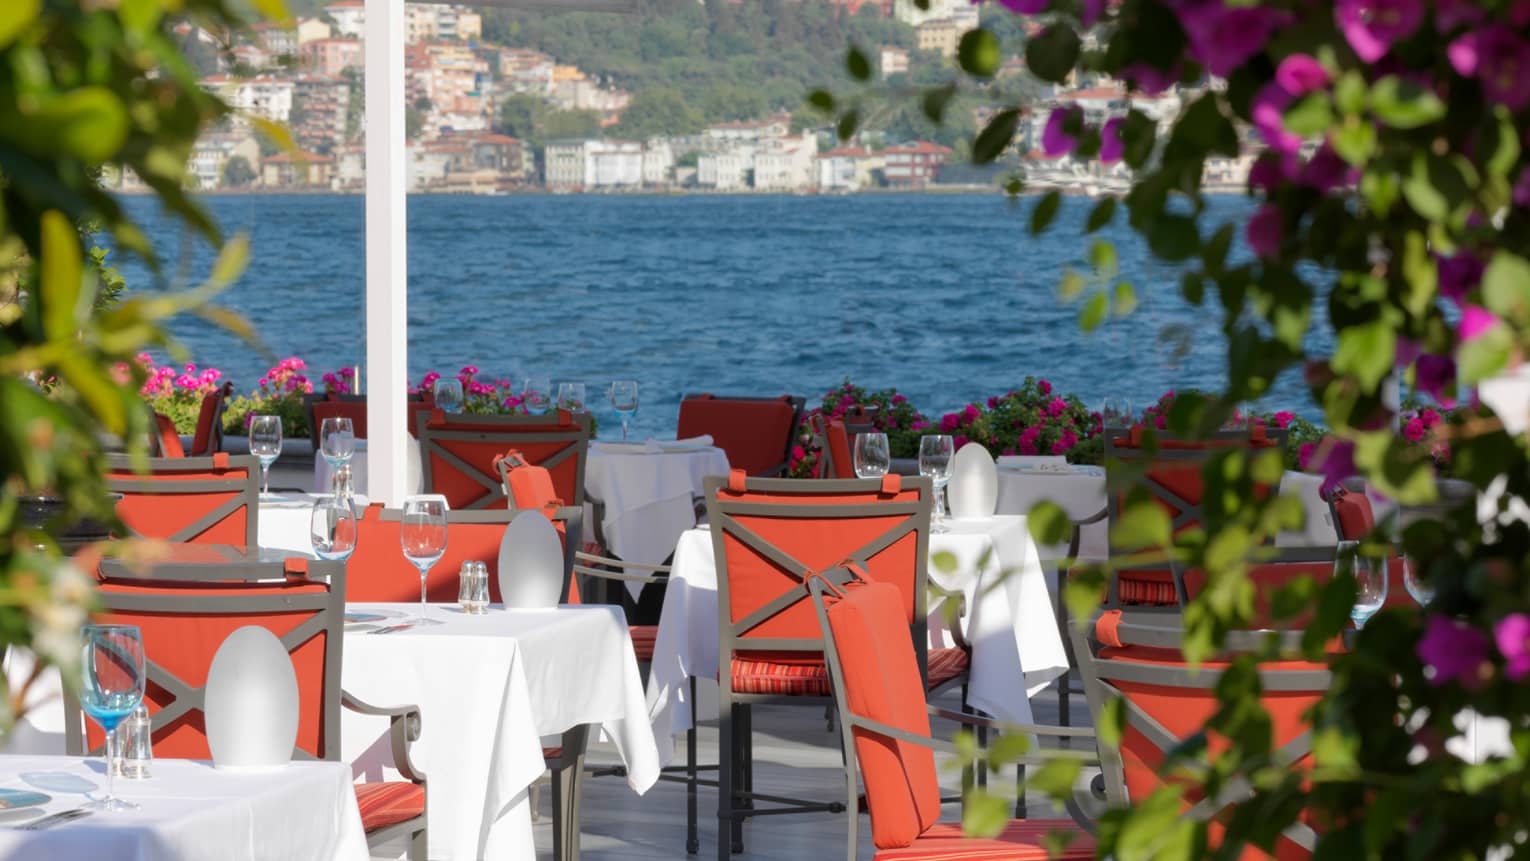 Red dining chairs, tables with white cloths on sunny Aqua restaurant patio